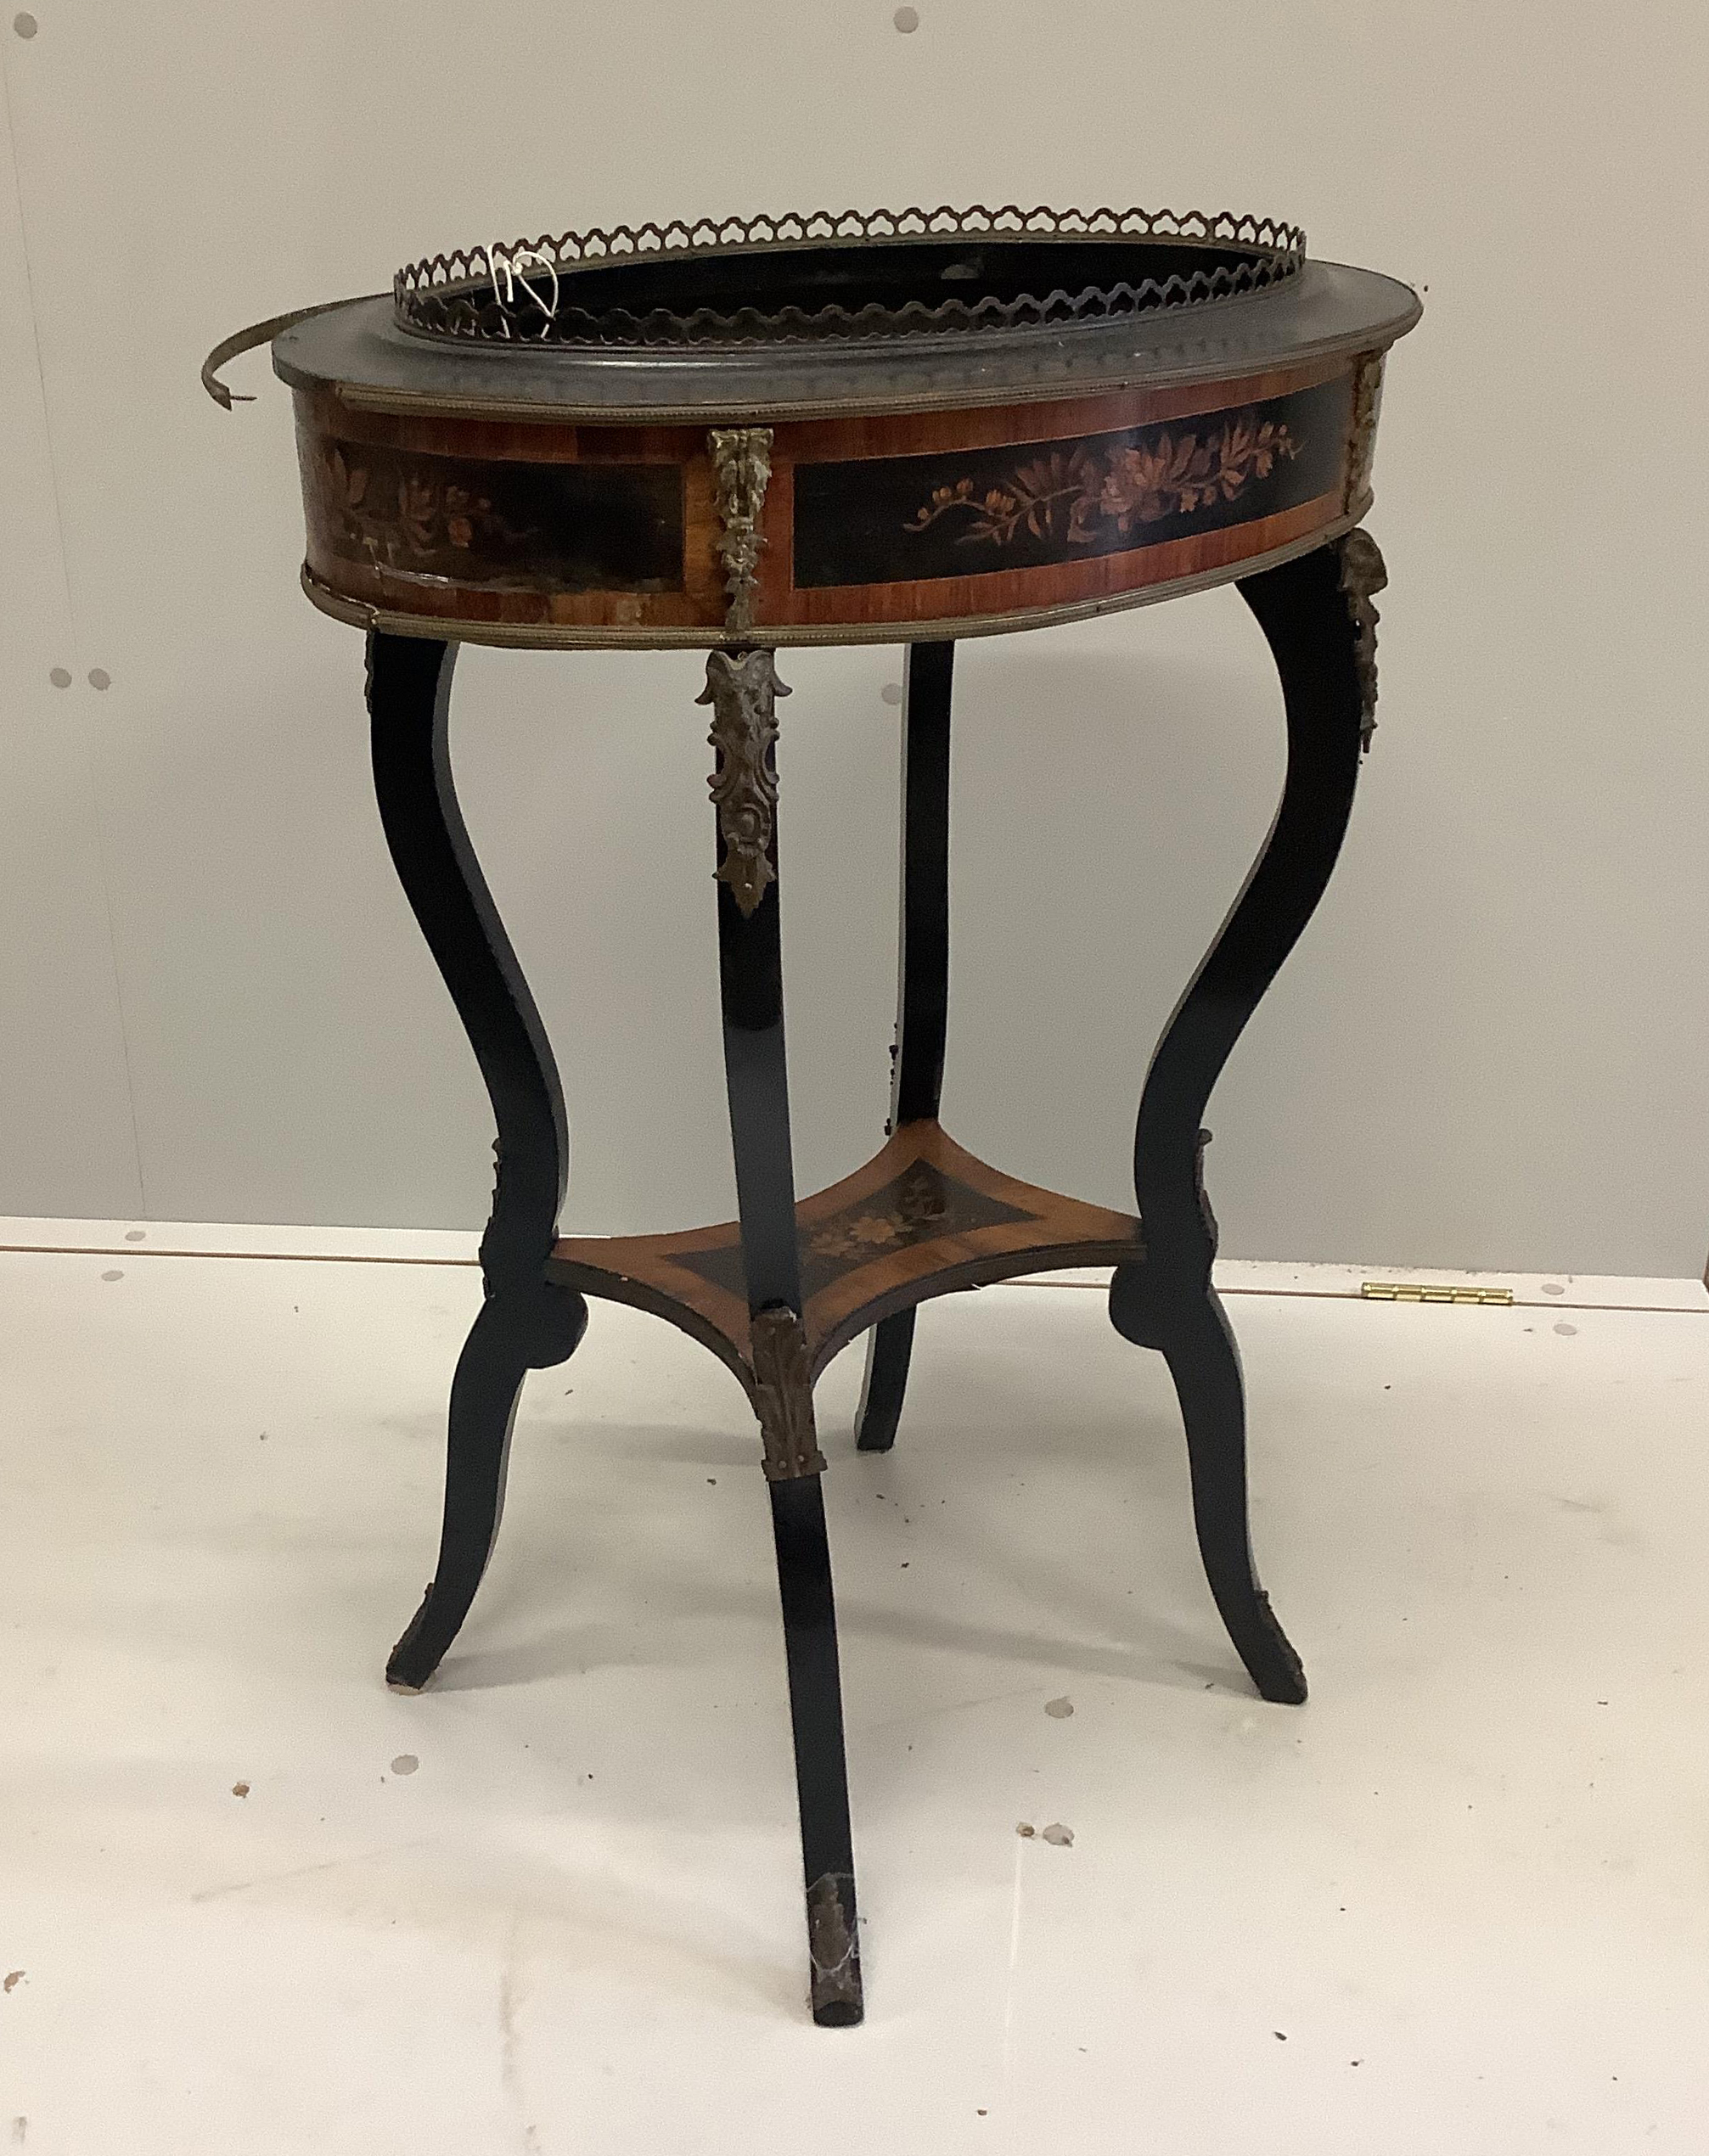 A late 19th century French marquetry inlaid ebonised and kingwood oval jardiniere table, width 56cm, depth 40cm, height 82cm